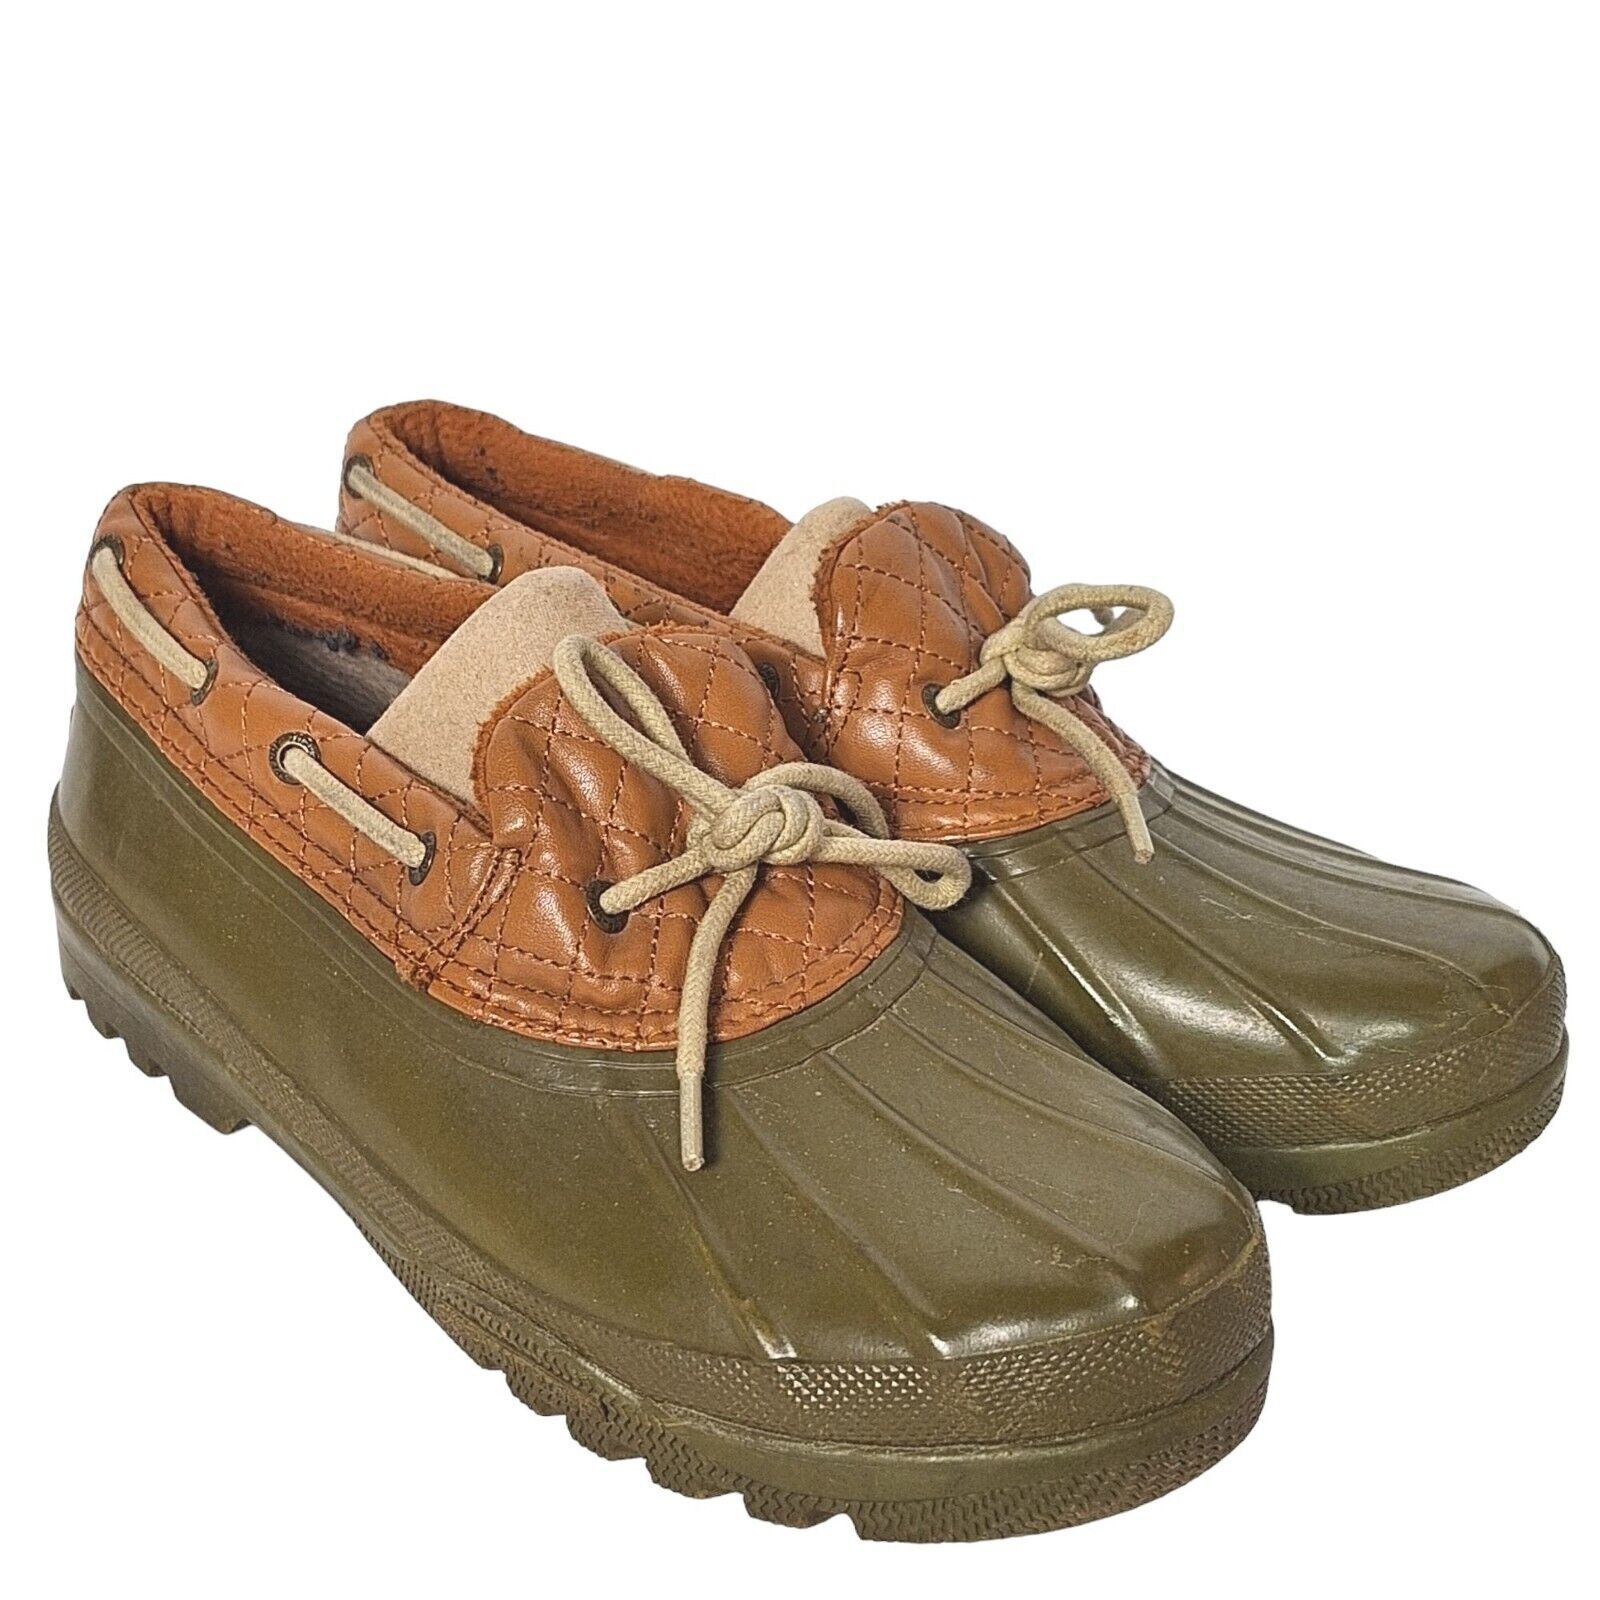 Primary image for Sperry Top Sider Womens Green Waterproof Rubber Duck Boot Shoes Size 8 M